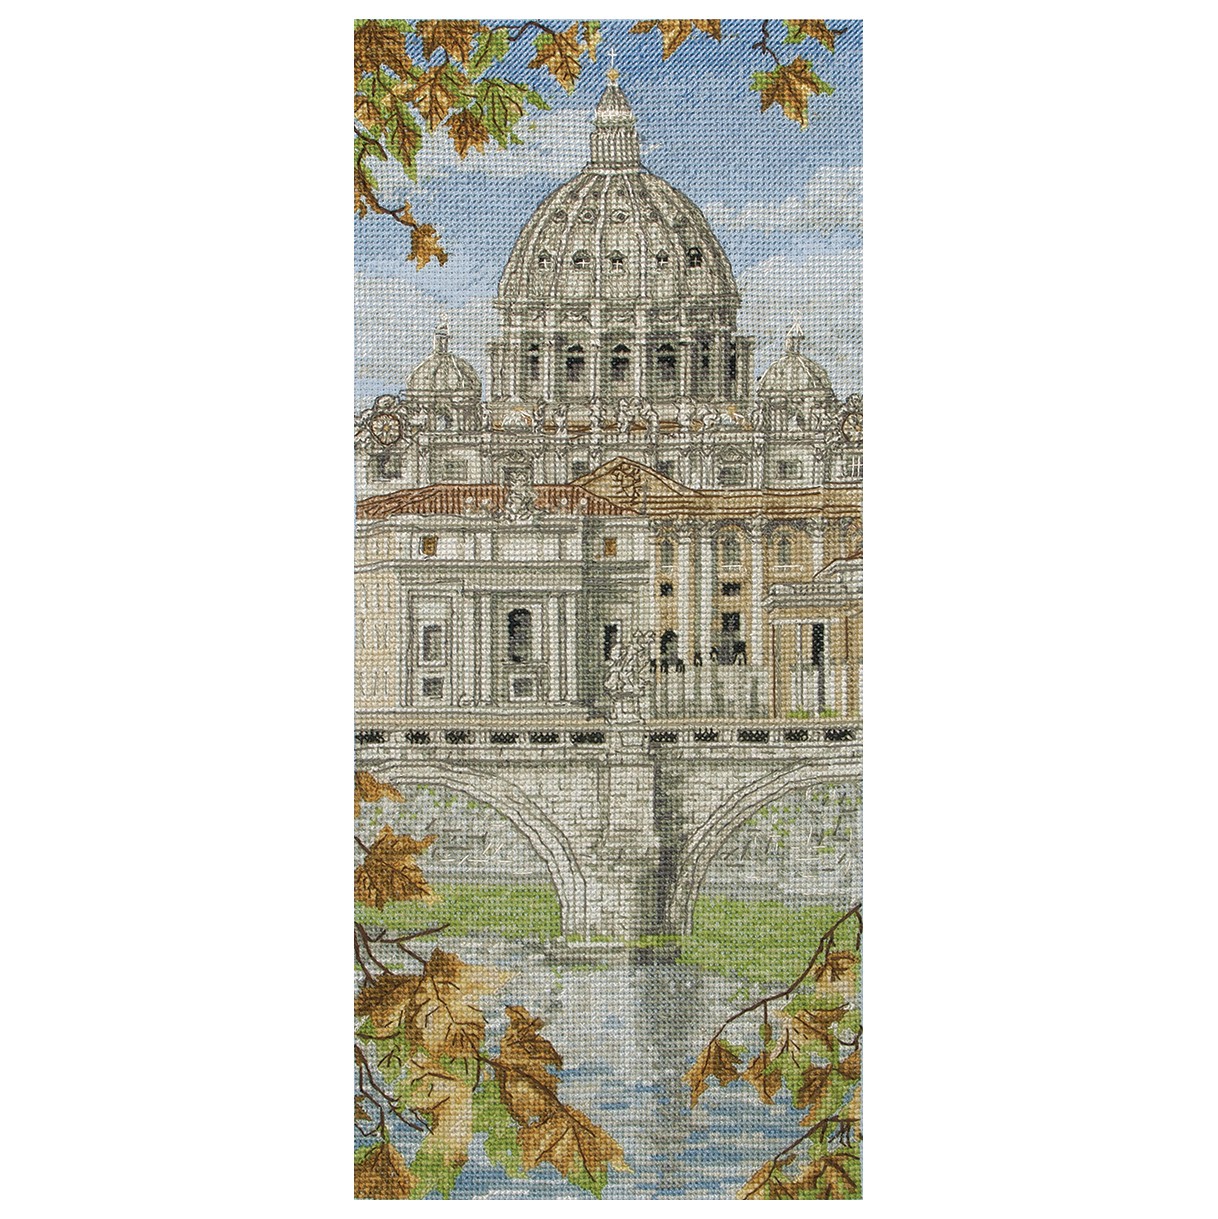 St Peters Basilica Counted Cross Stitch Kit